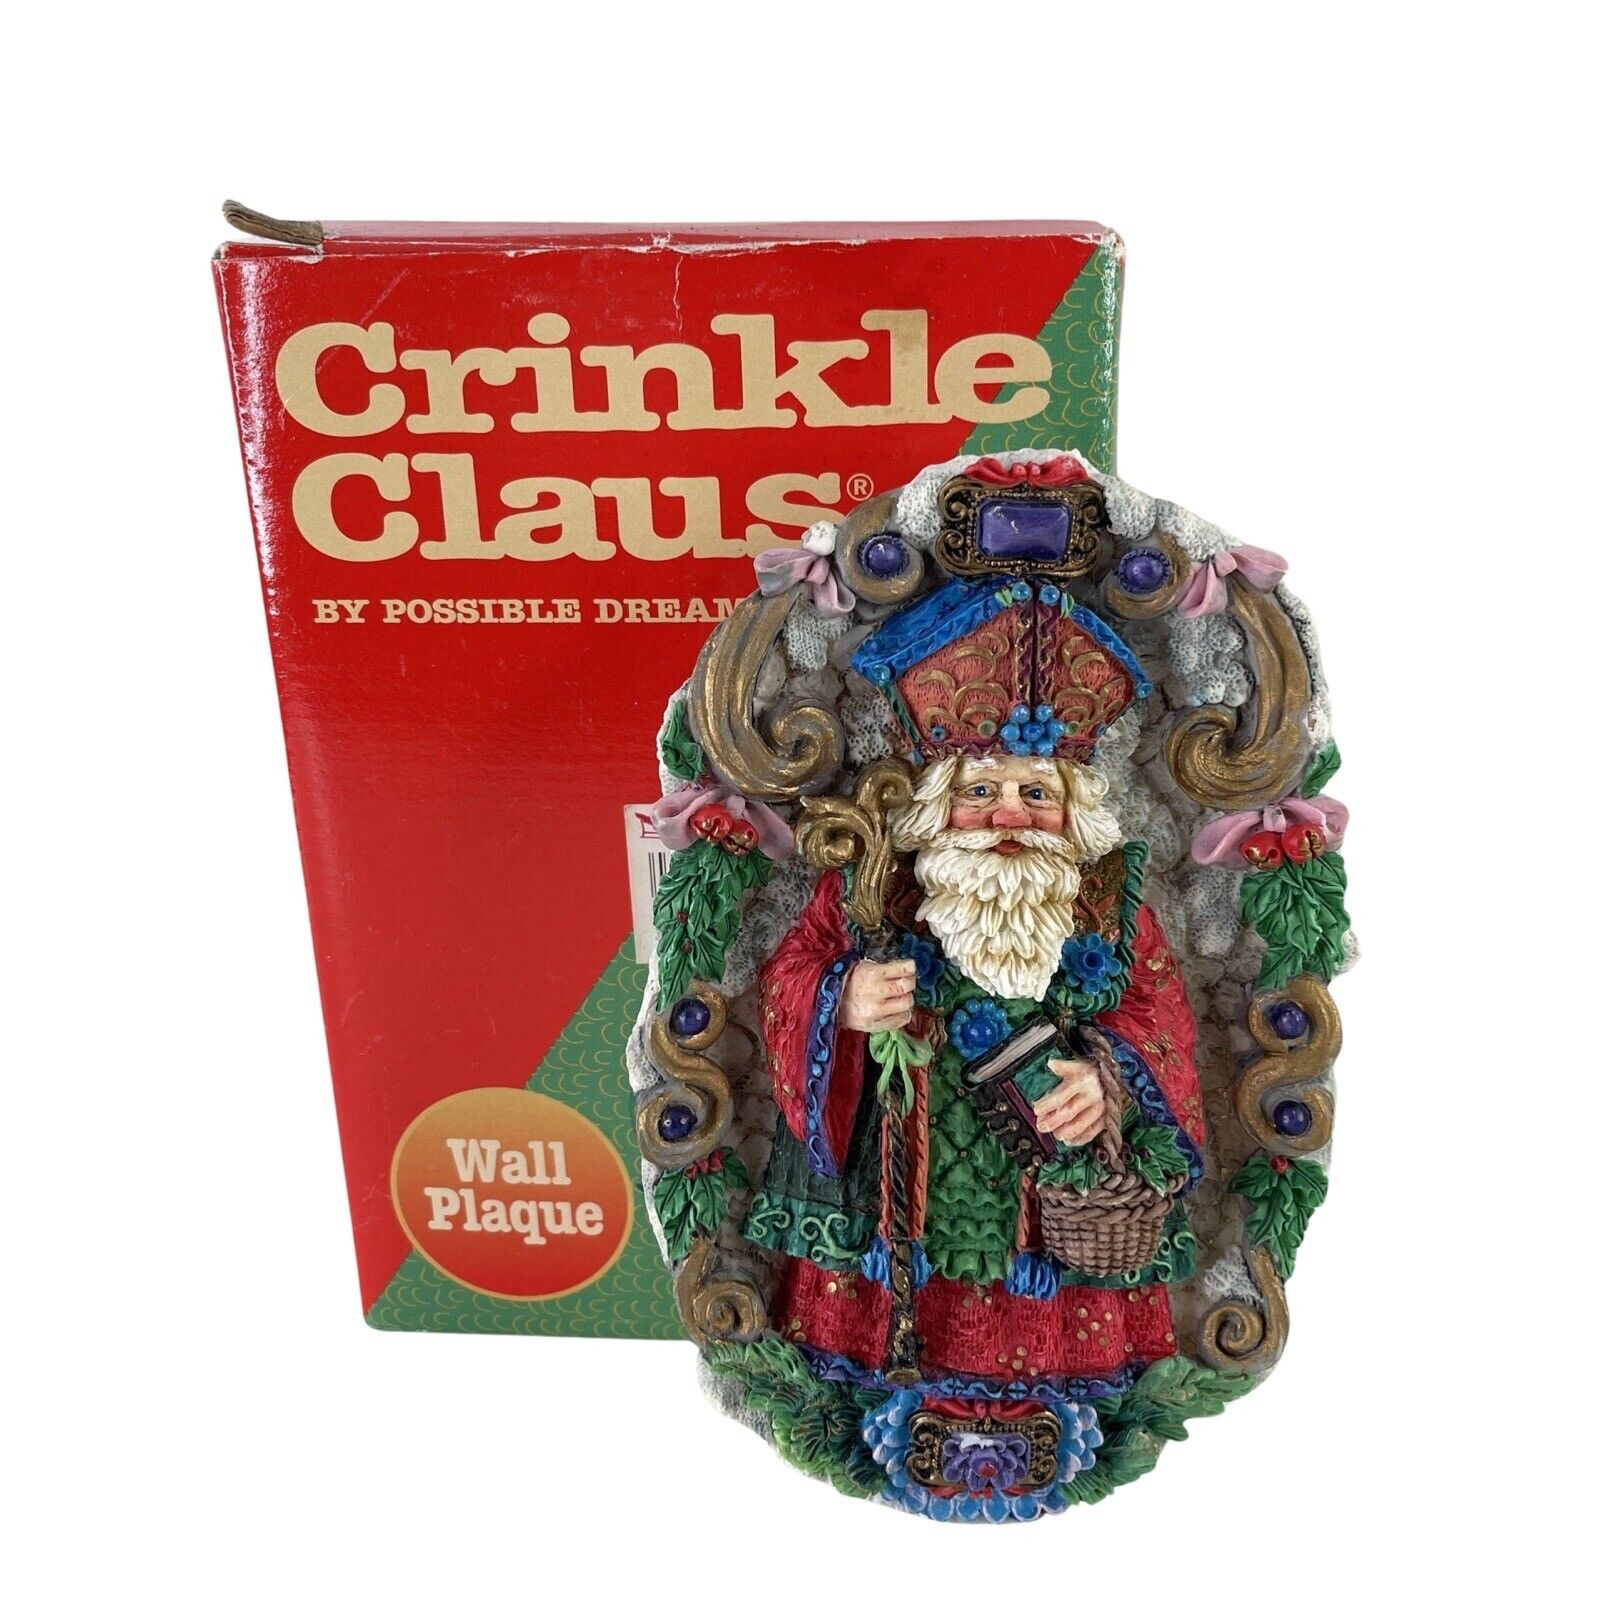 VTG Santa Claus Wall Decor Plaque Possible Dreams Iceland Visitor Crinkle Claus